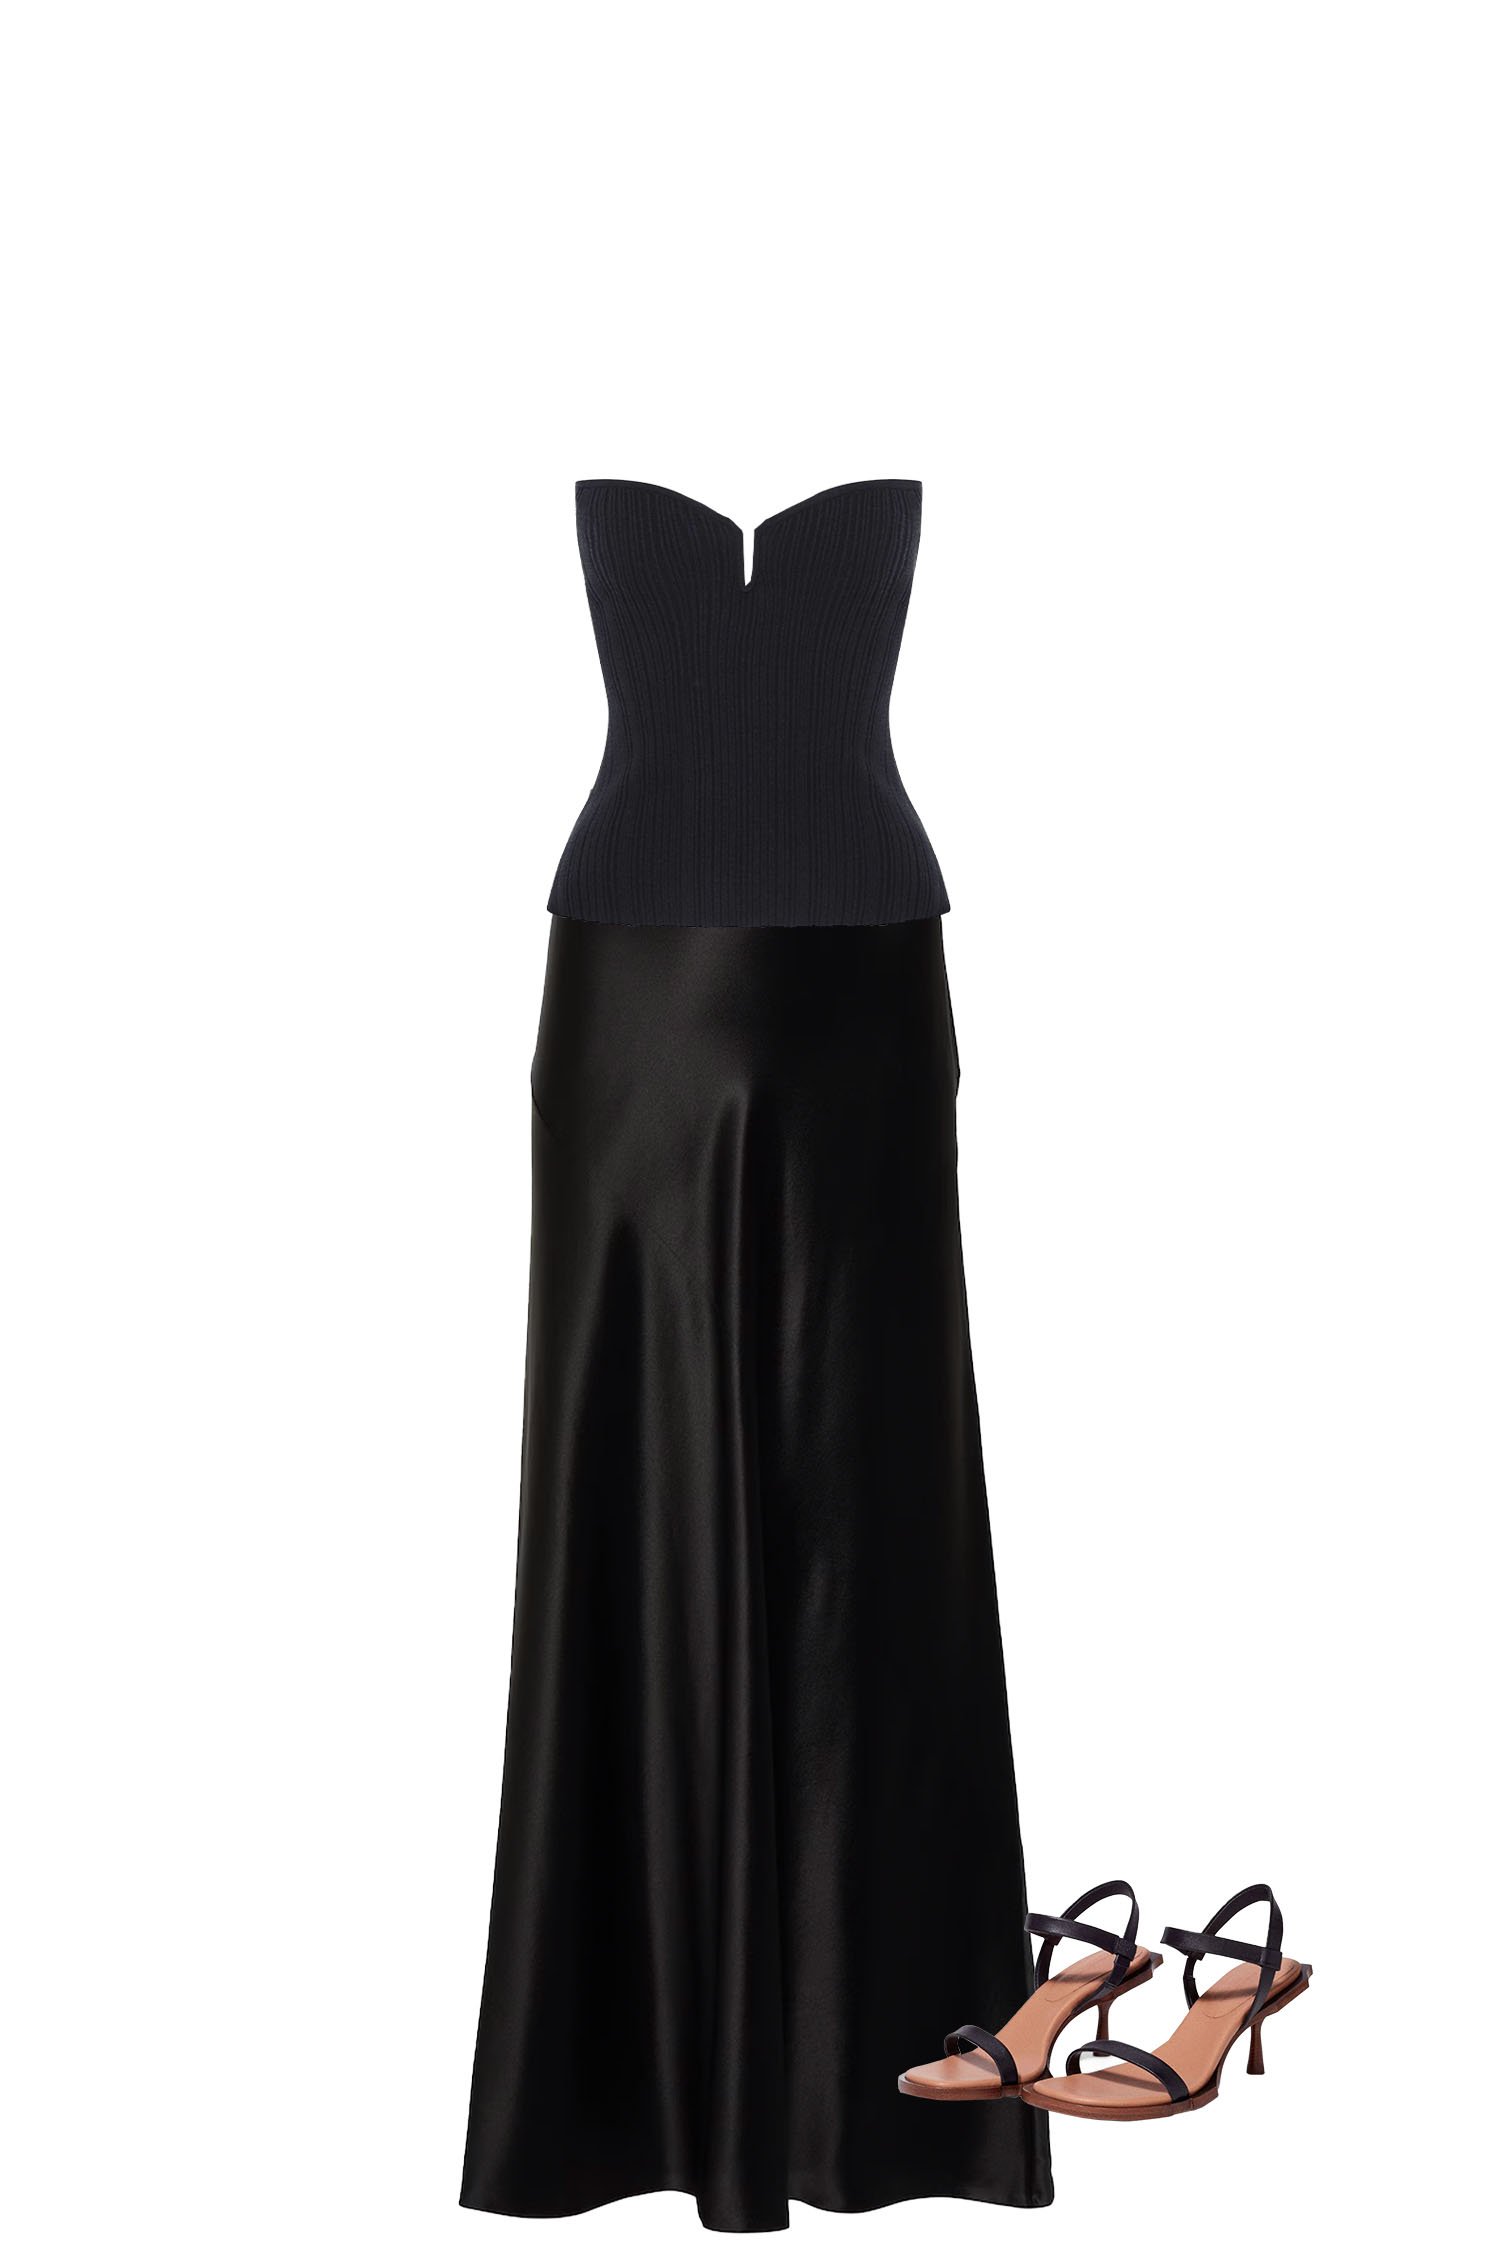 Black Satin Maxi Skirt Outfit with Black Sweetheart Neckline Strapless Top and Black Heeled Sandals